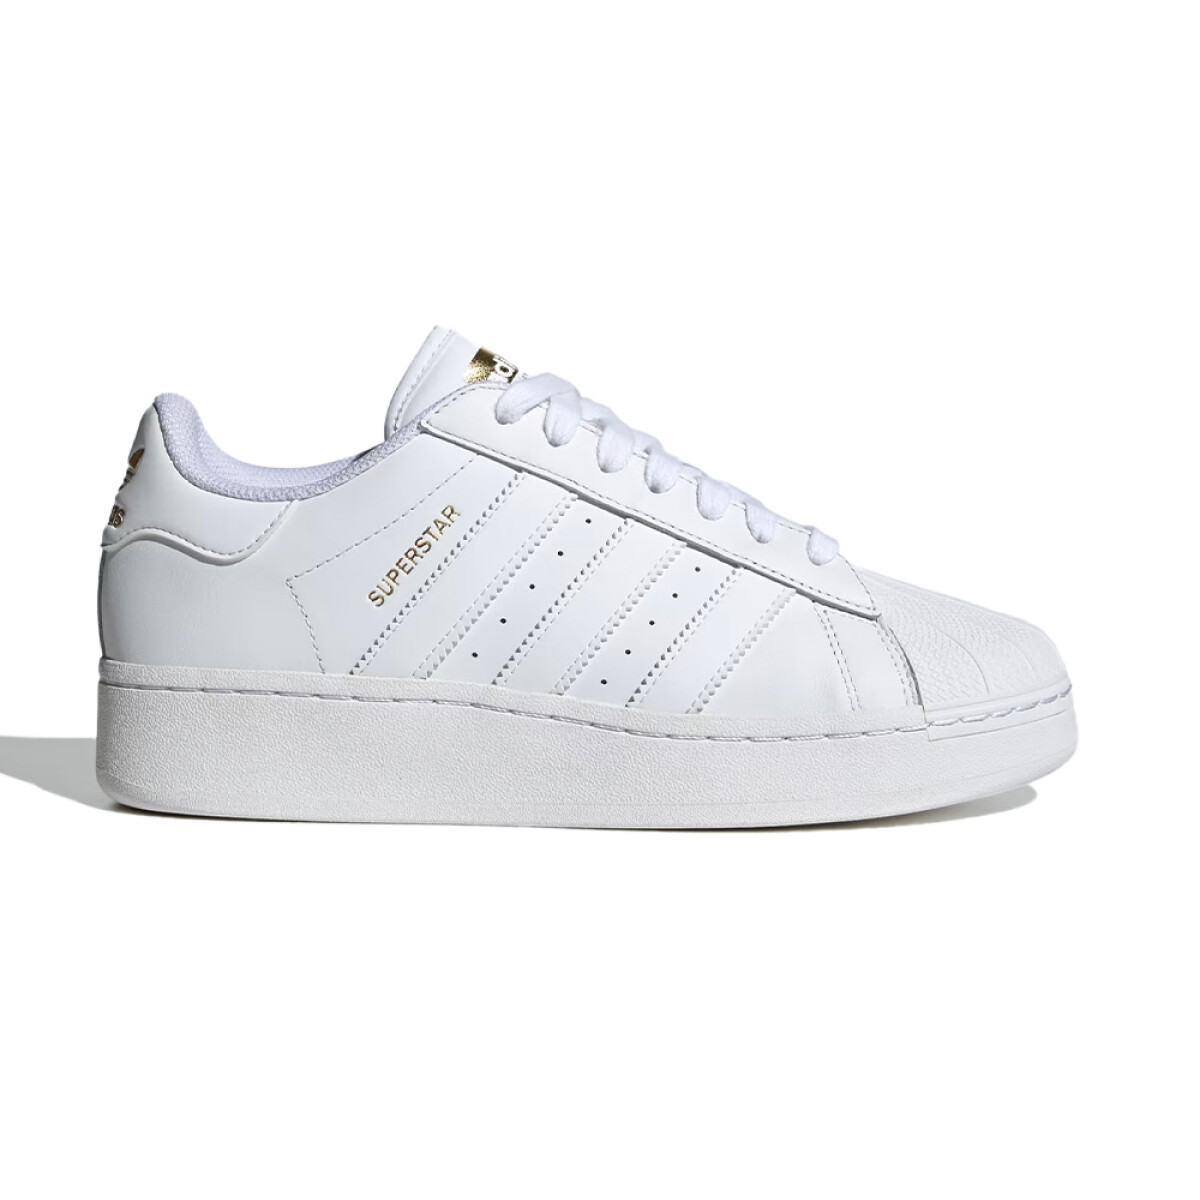 Championes Superstar XLG Shoes - WHITE 